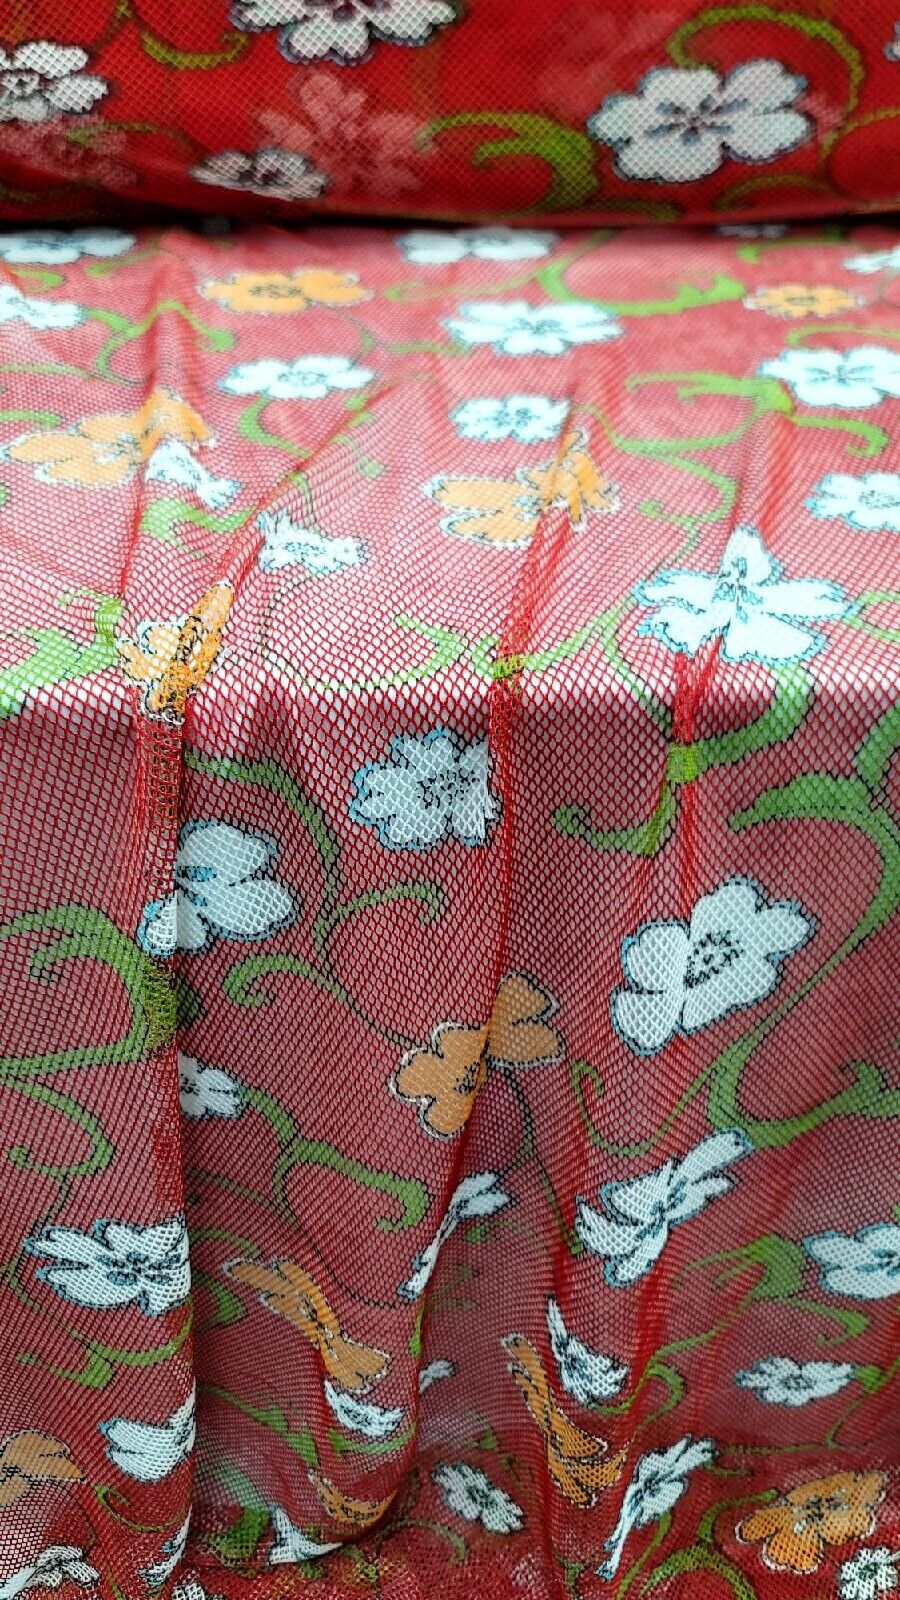 Fish Net Red Floral Flowers Fabric - Sold By The Yard - Fashion Fabric (54” Width)